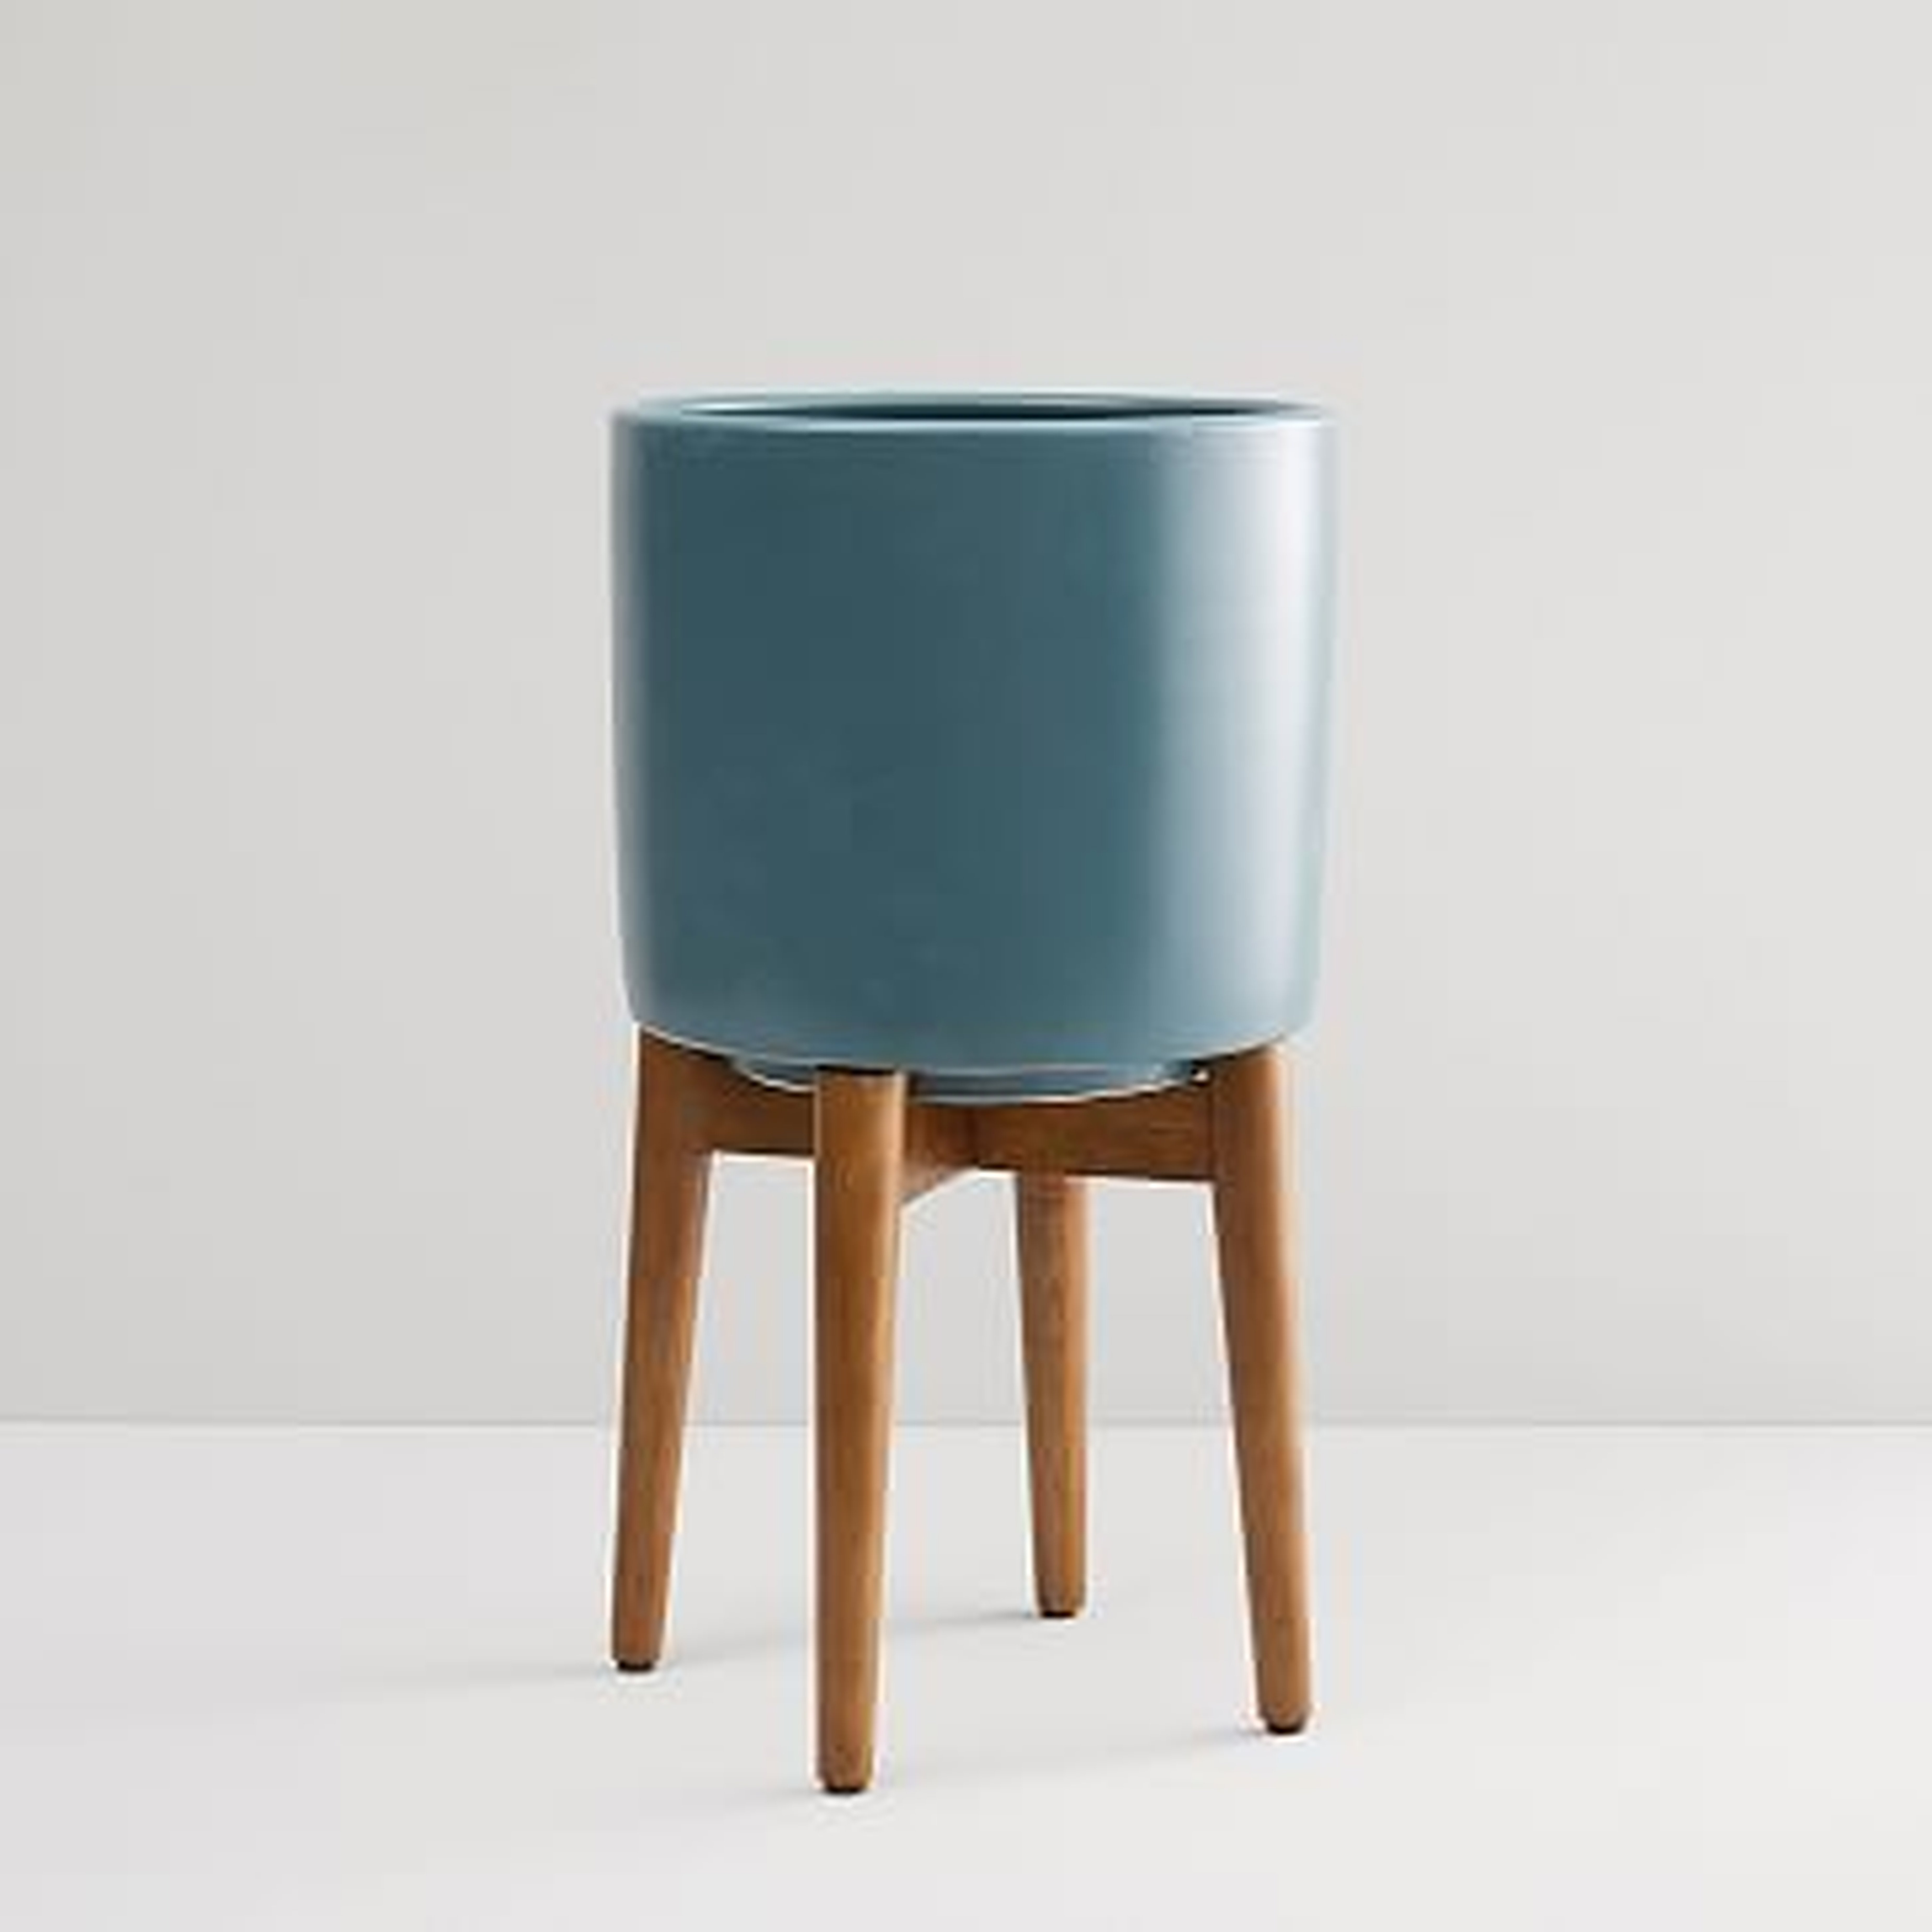 Turned Wood Standing Planter, Teal/Acorn Base, Tall - West Elm